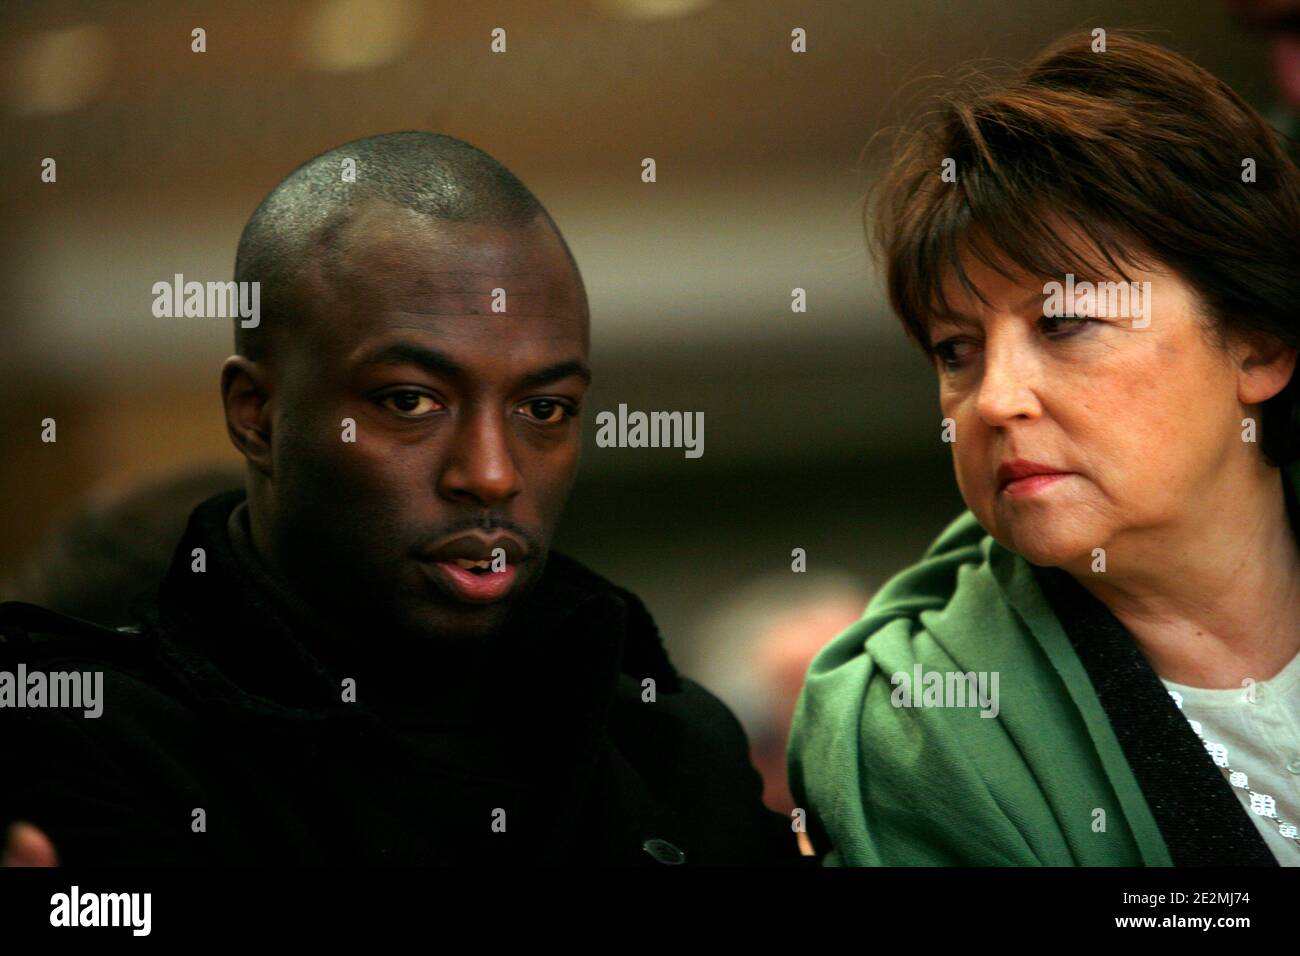 Ali Soumare and the first secretary of the Socialist Party (PS), Martine Aubry attend a national gathering of the secretaries of section of the Socialist Party at the Mutualite in Paris, France, on January 31, 2010. Photo by Jean-Luc Luyssen/ABACAPRESS.COM Stock Photo